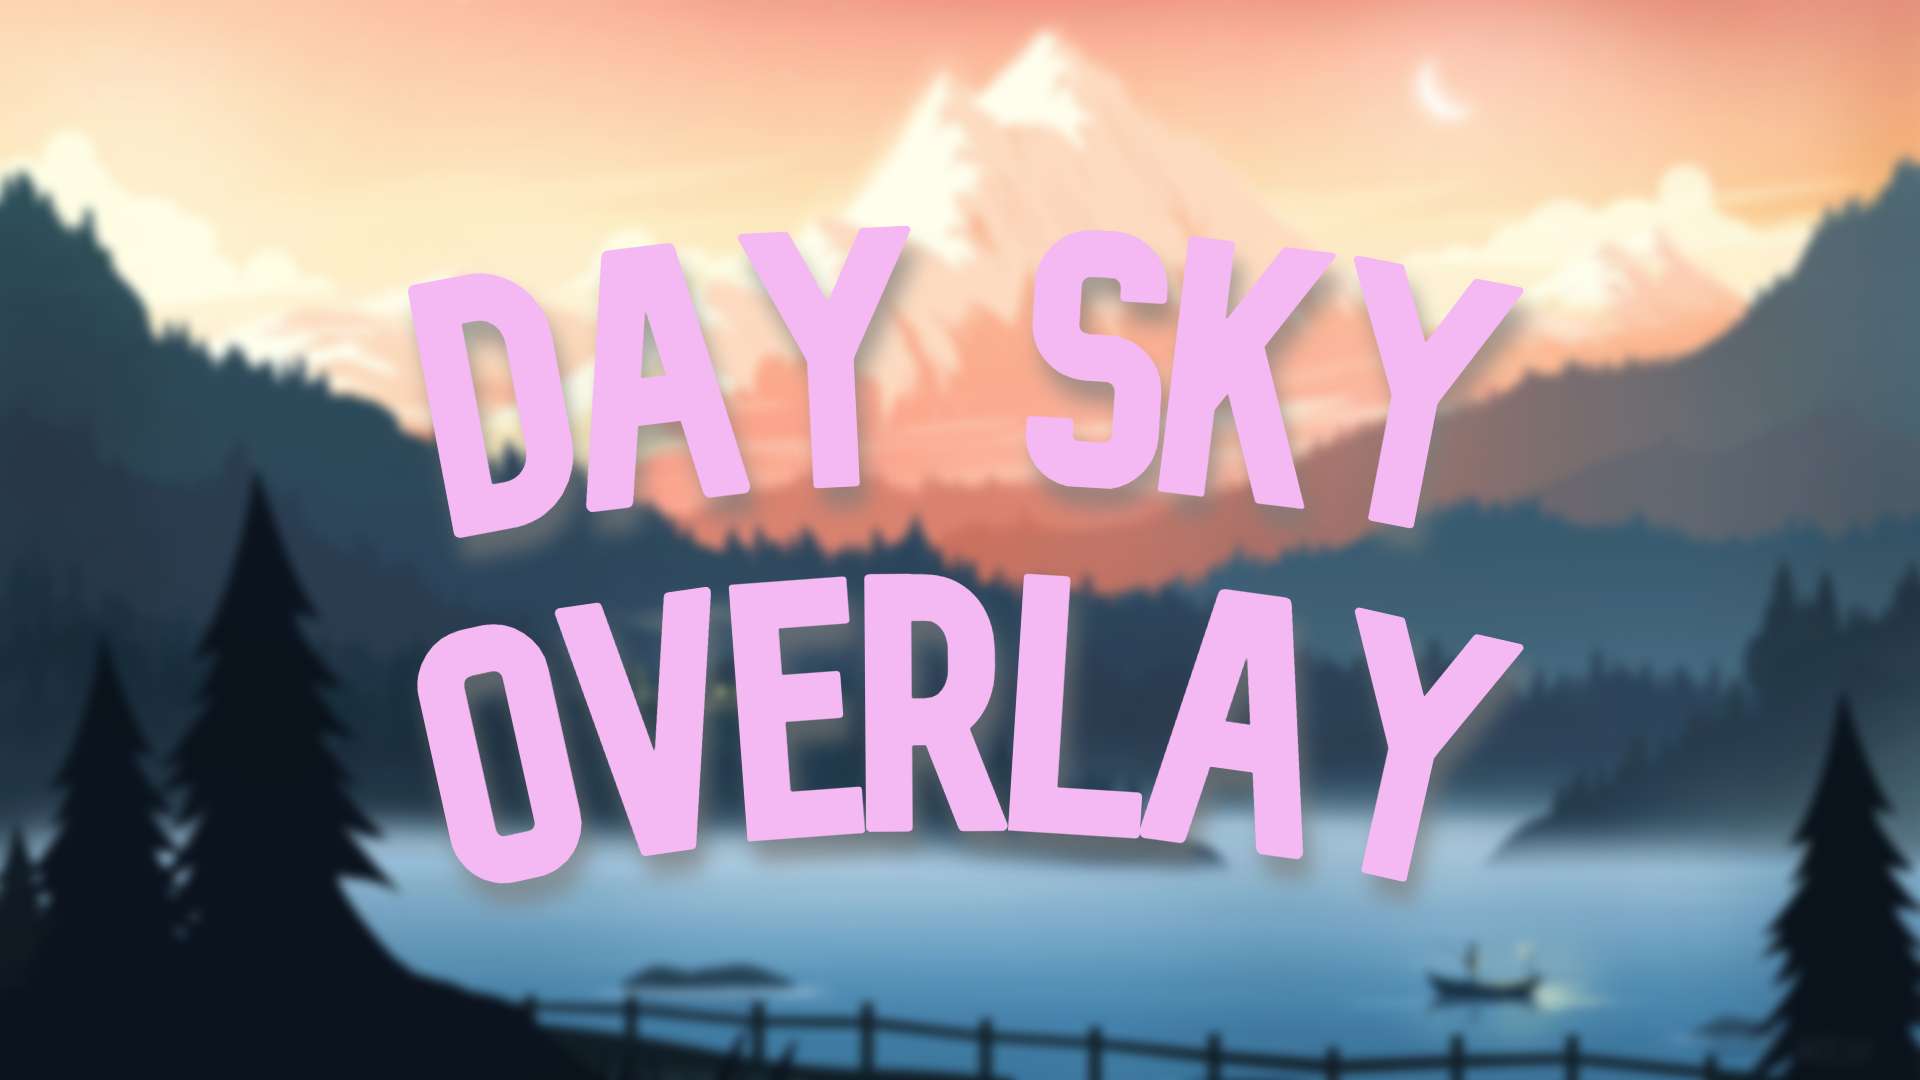 Day Sky Overlay #5 16 by Rh56 on PvPRP